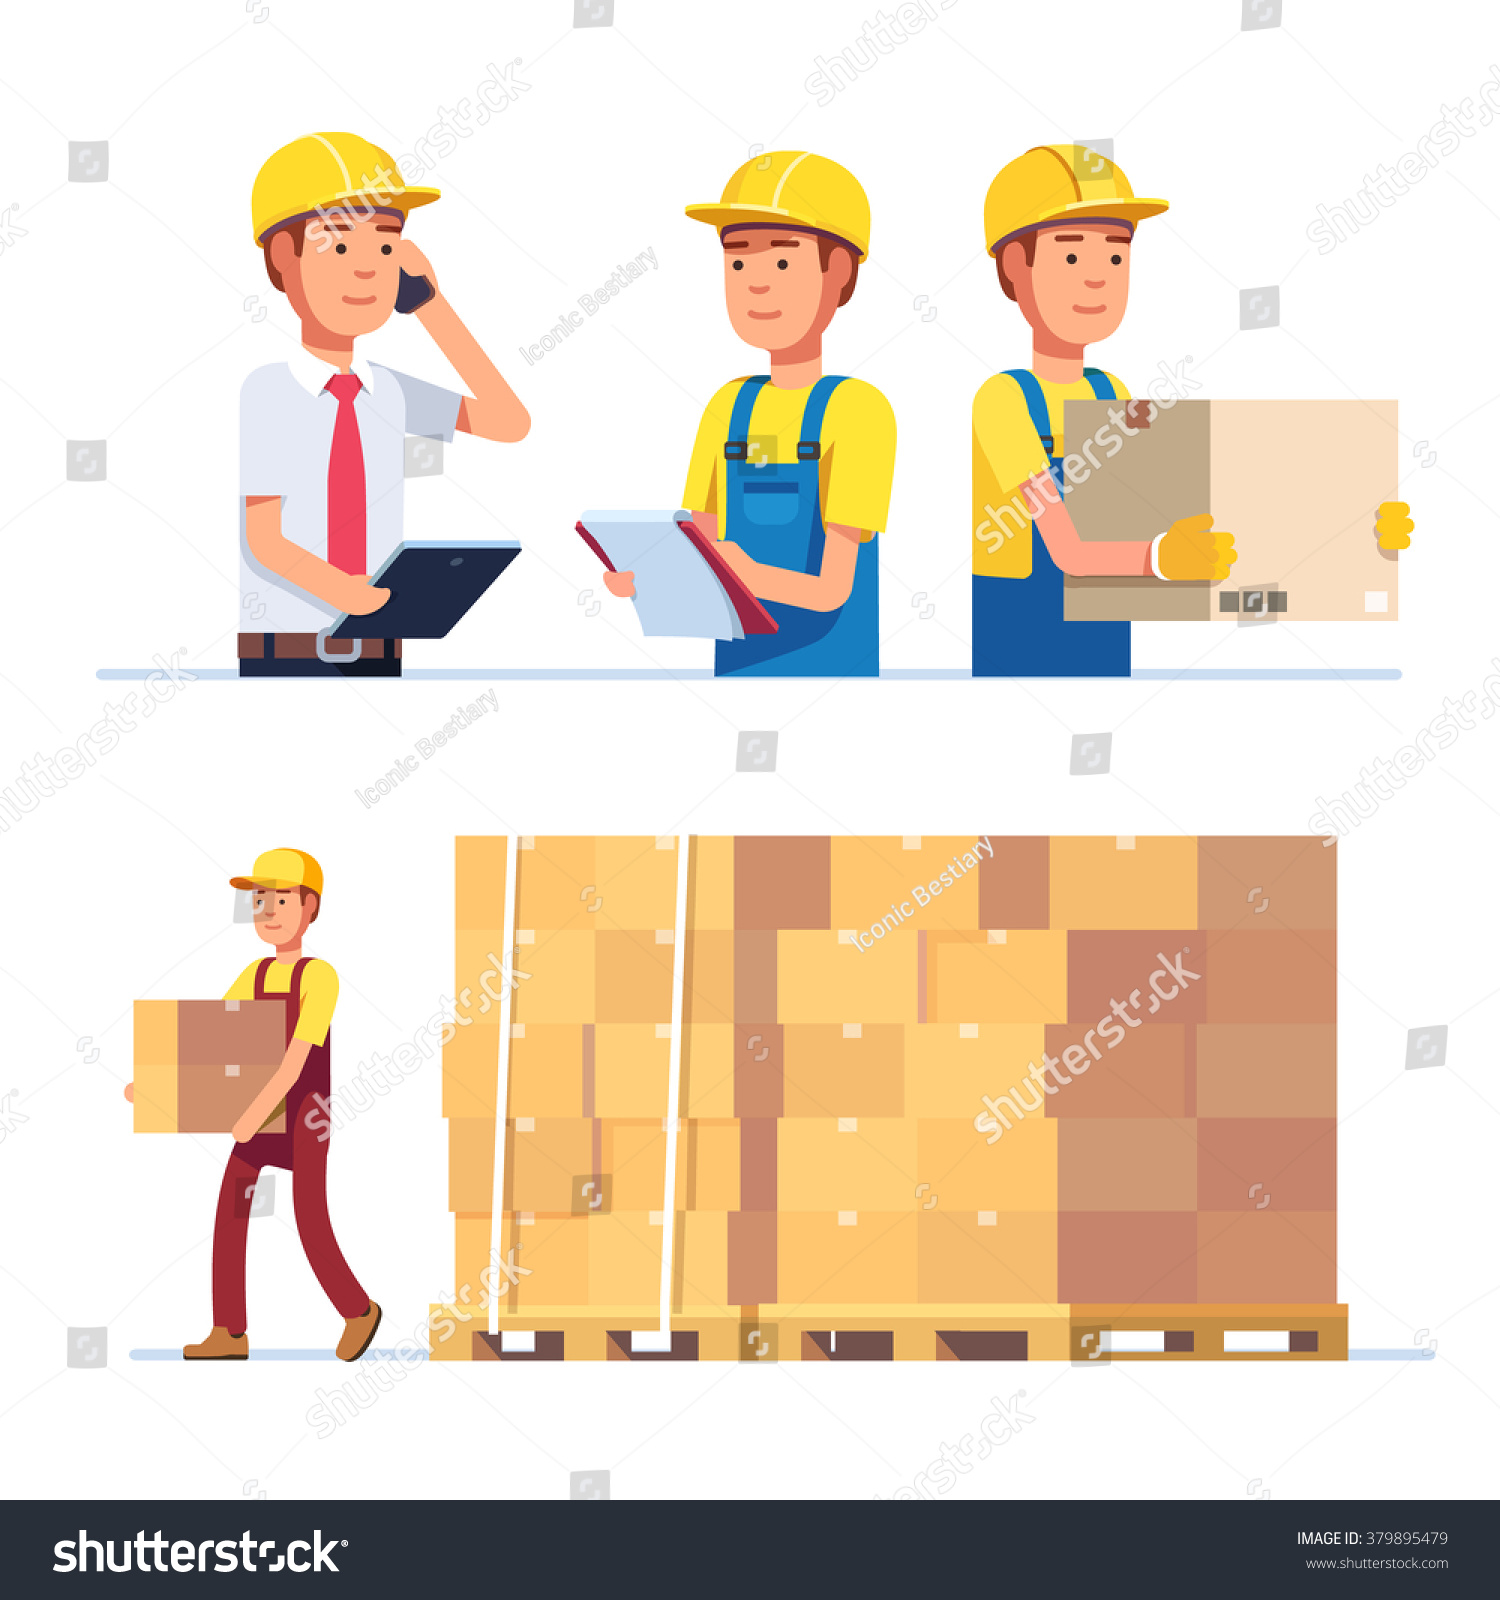 warehouse worker clipart - photo #11